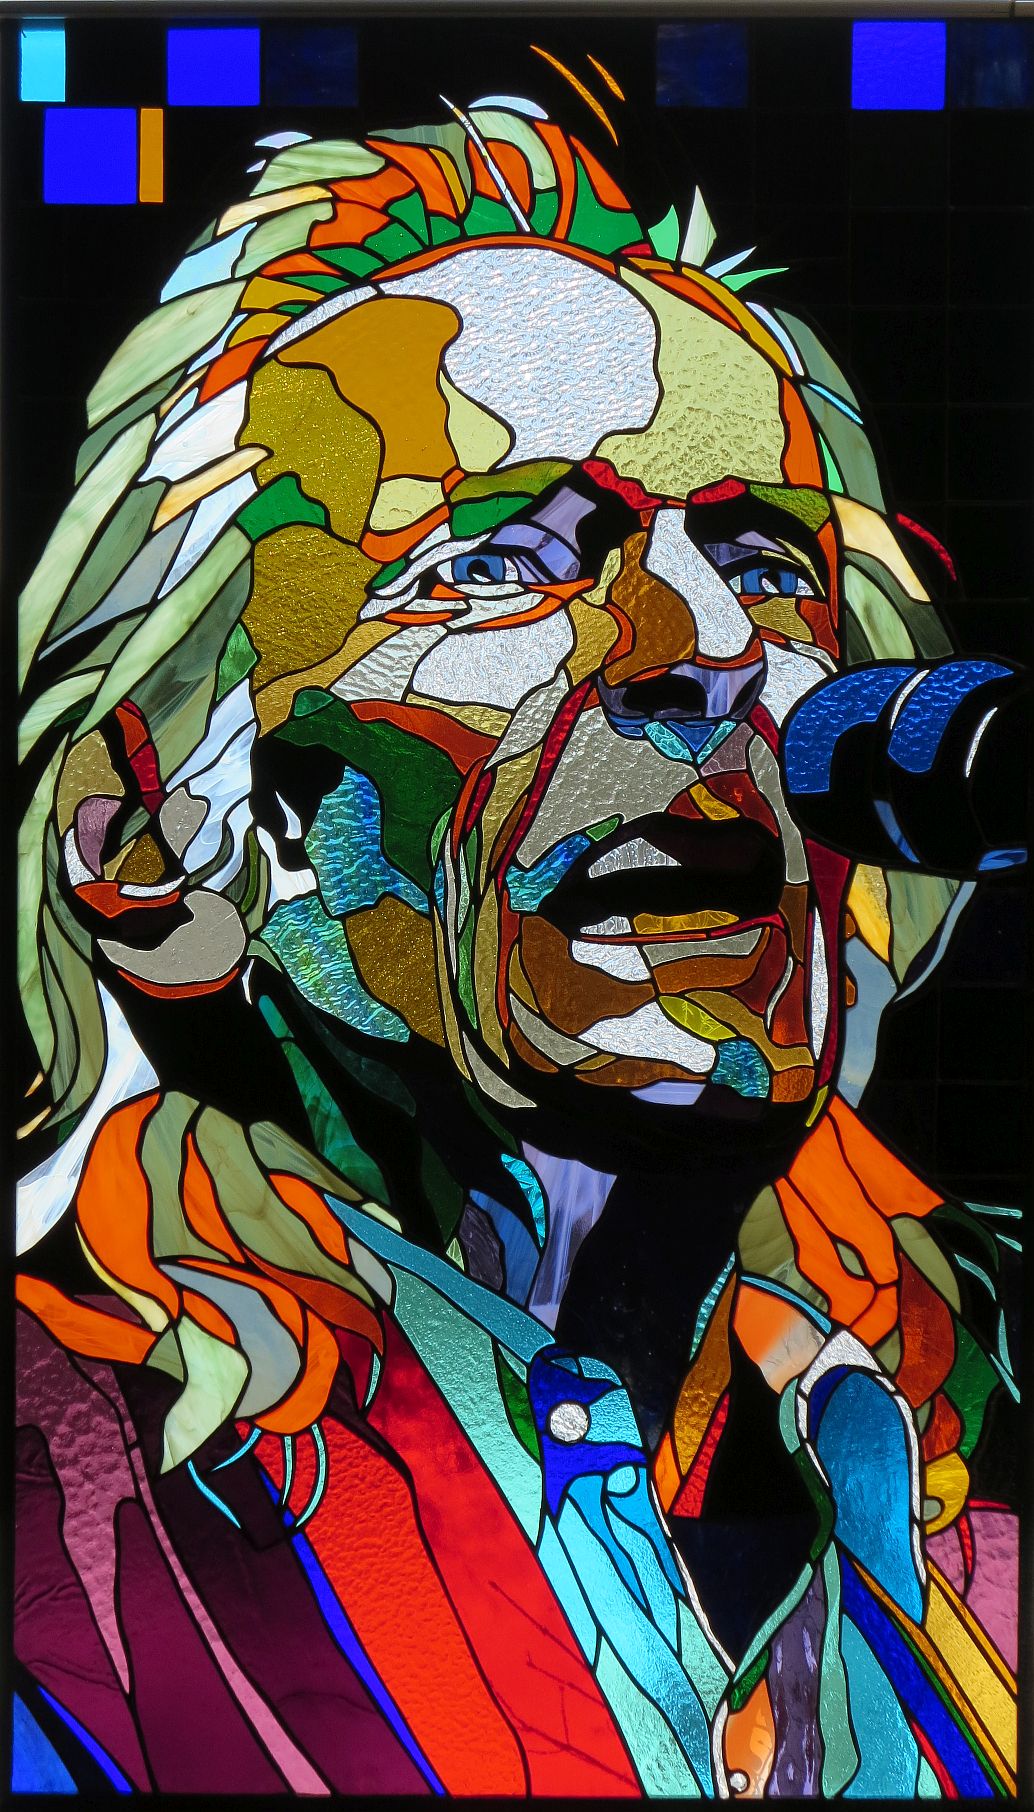 GORDON LIGHTFOOT 24 x 42 inches stained glass panel